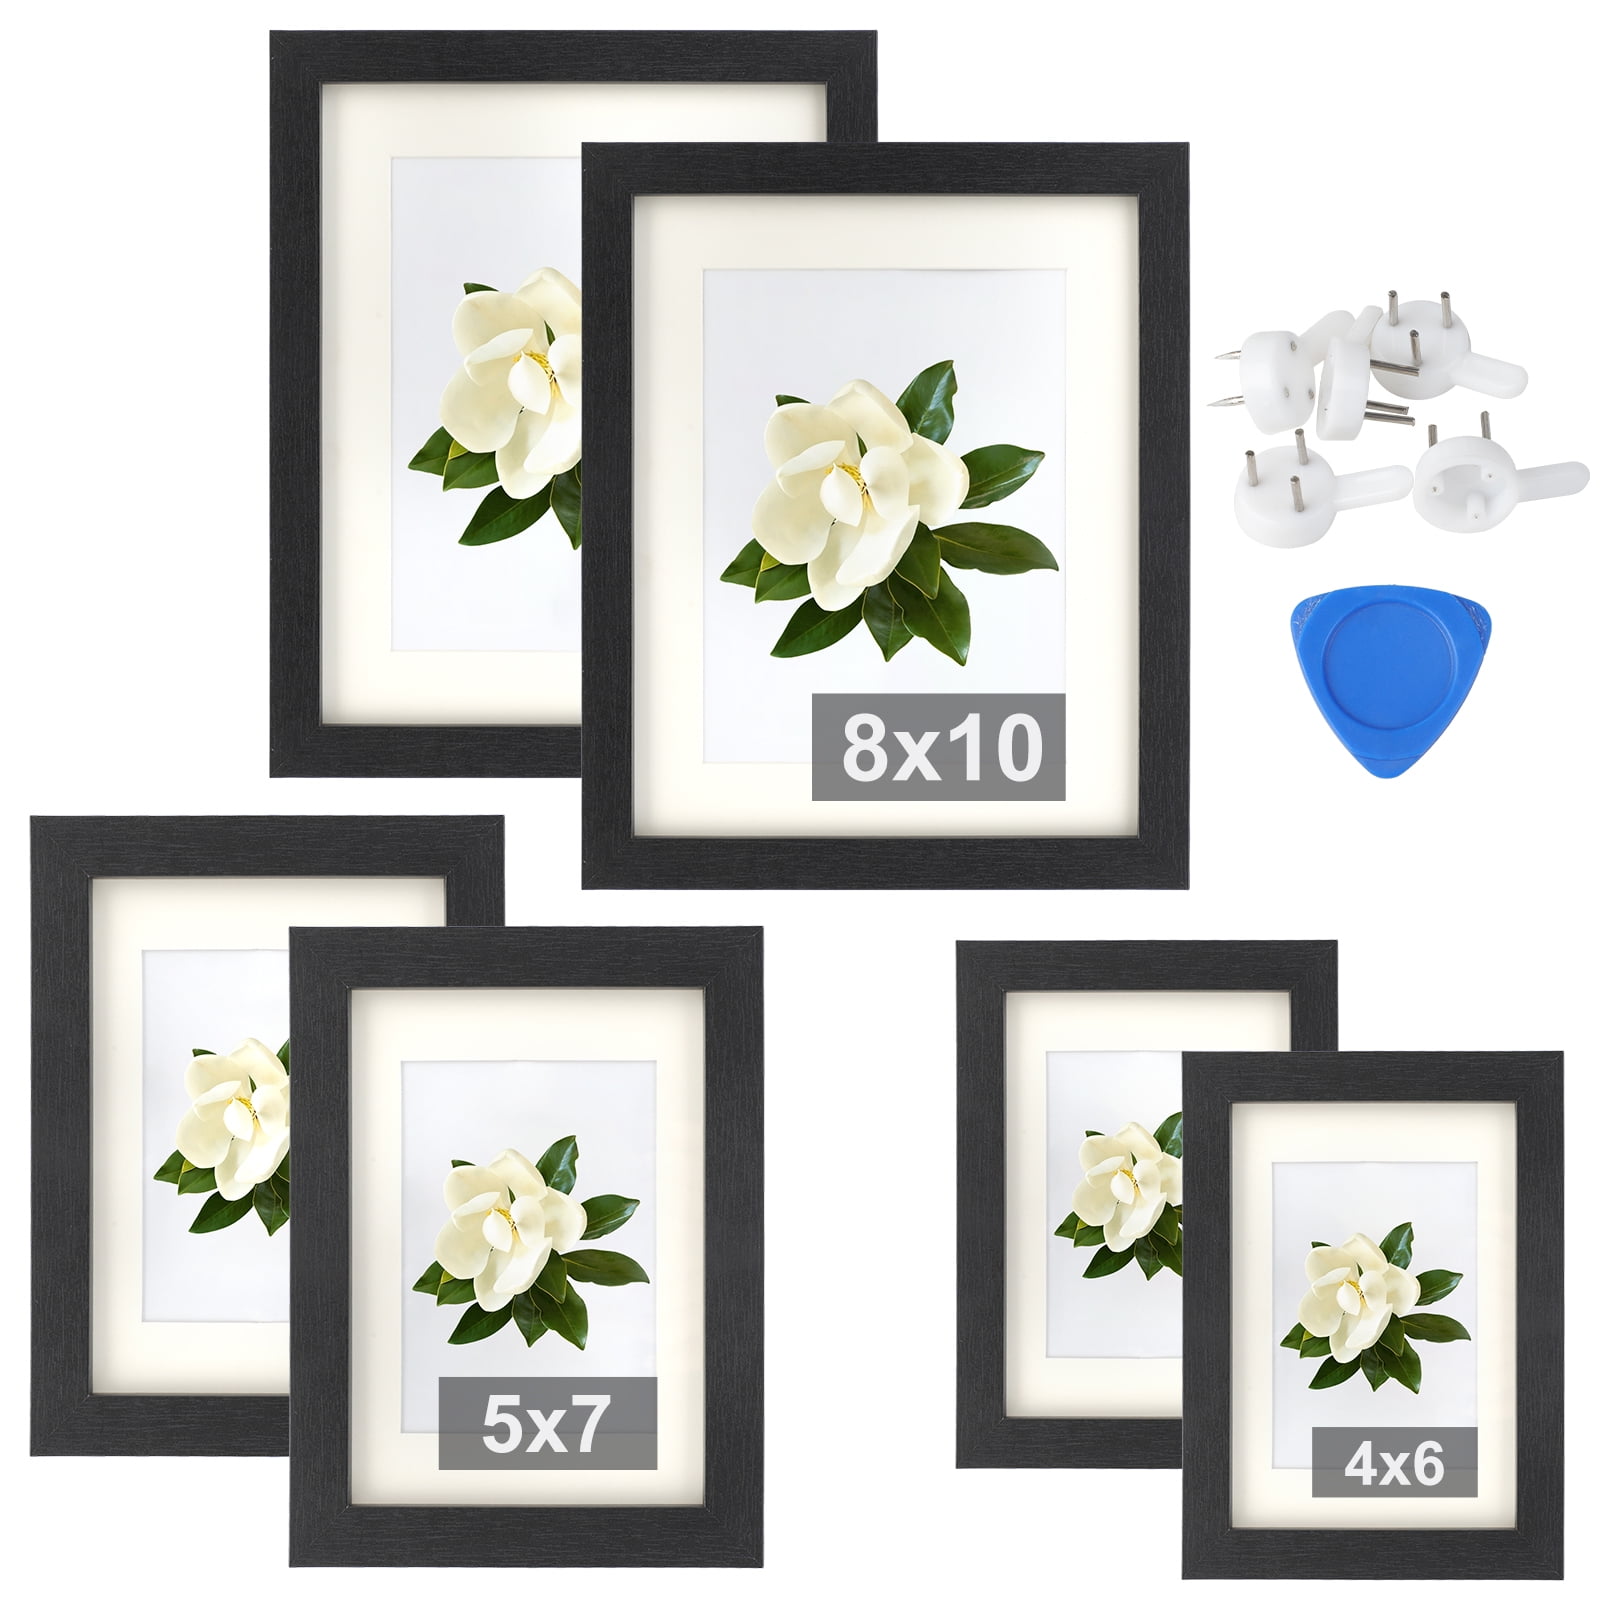 Details about   SIX TREES Black Wood Picture Photo Frames Two Sizes to Choose From 